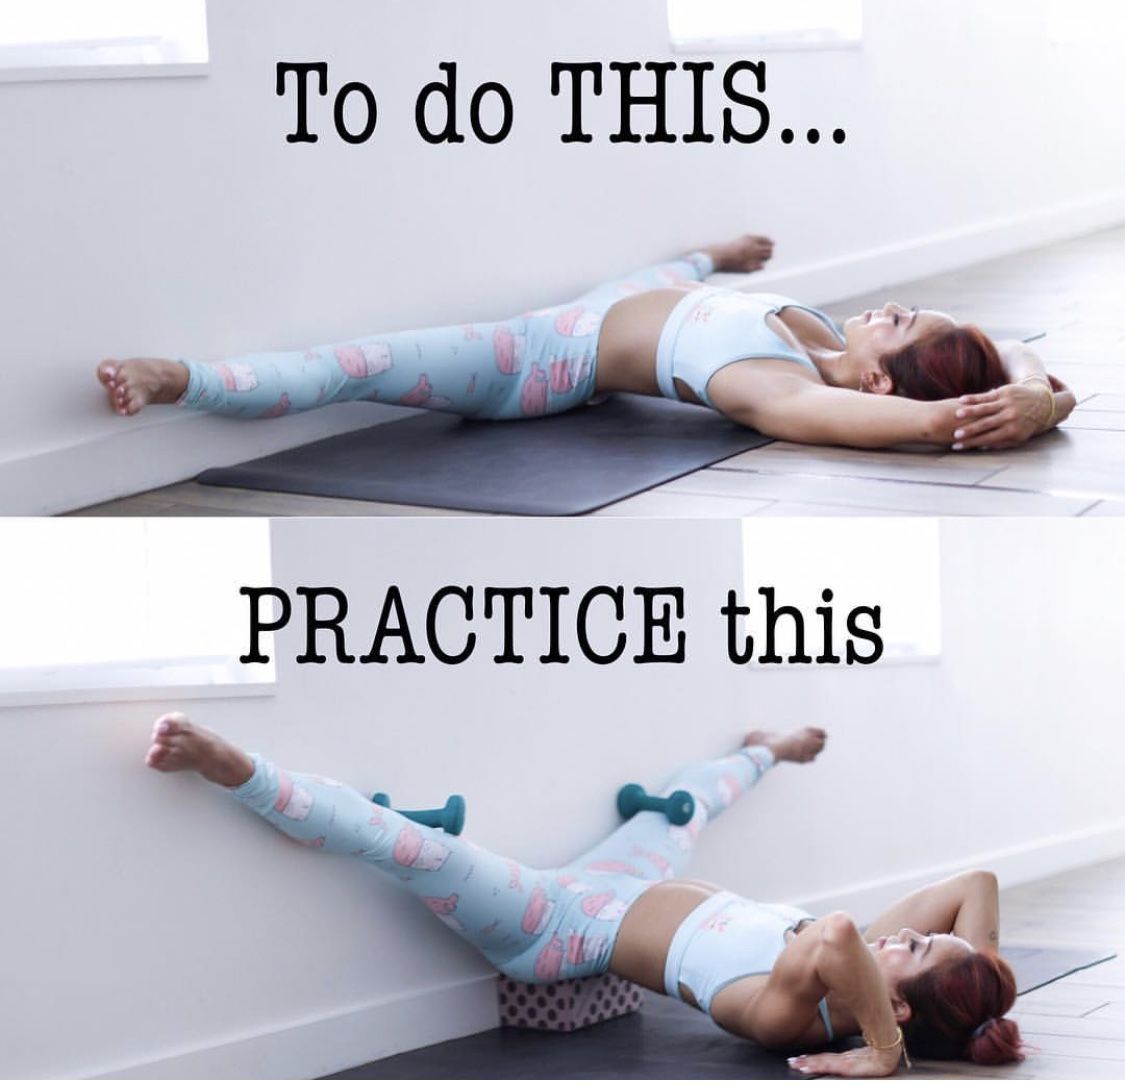 To do this and practice this in yoga -   22 fitness design yoga poses
 ideas